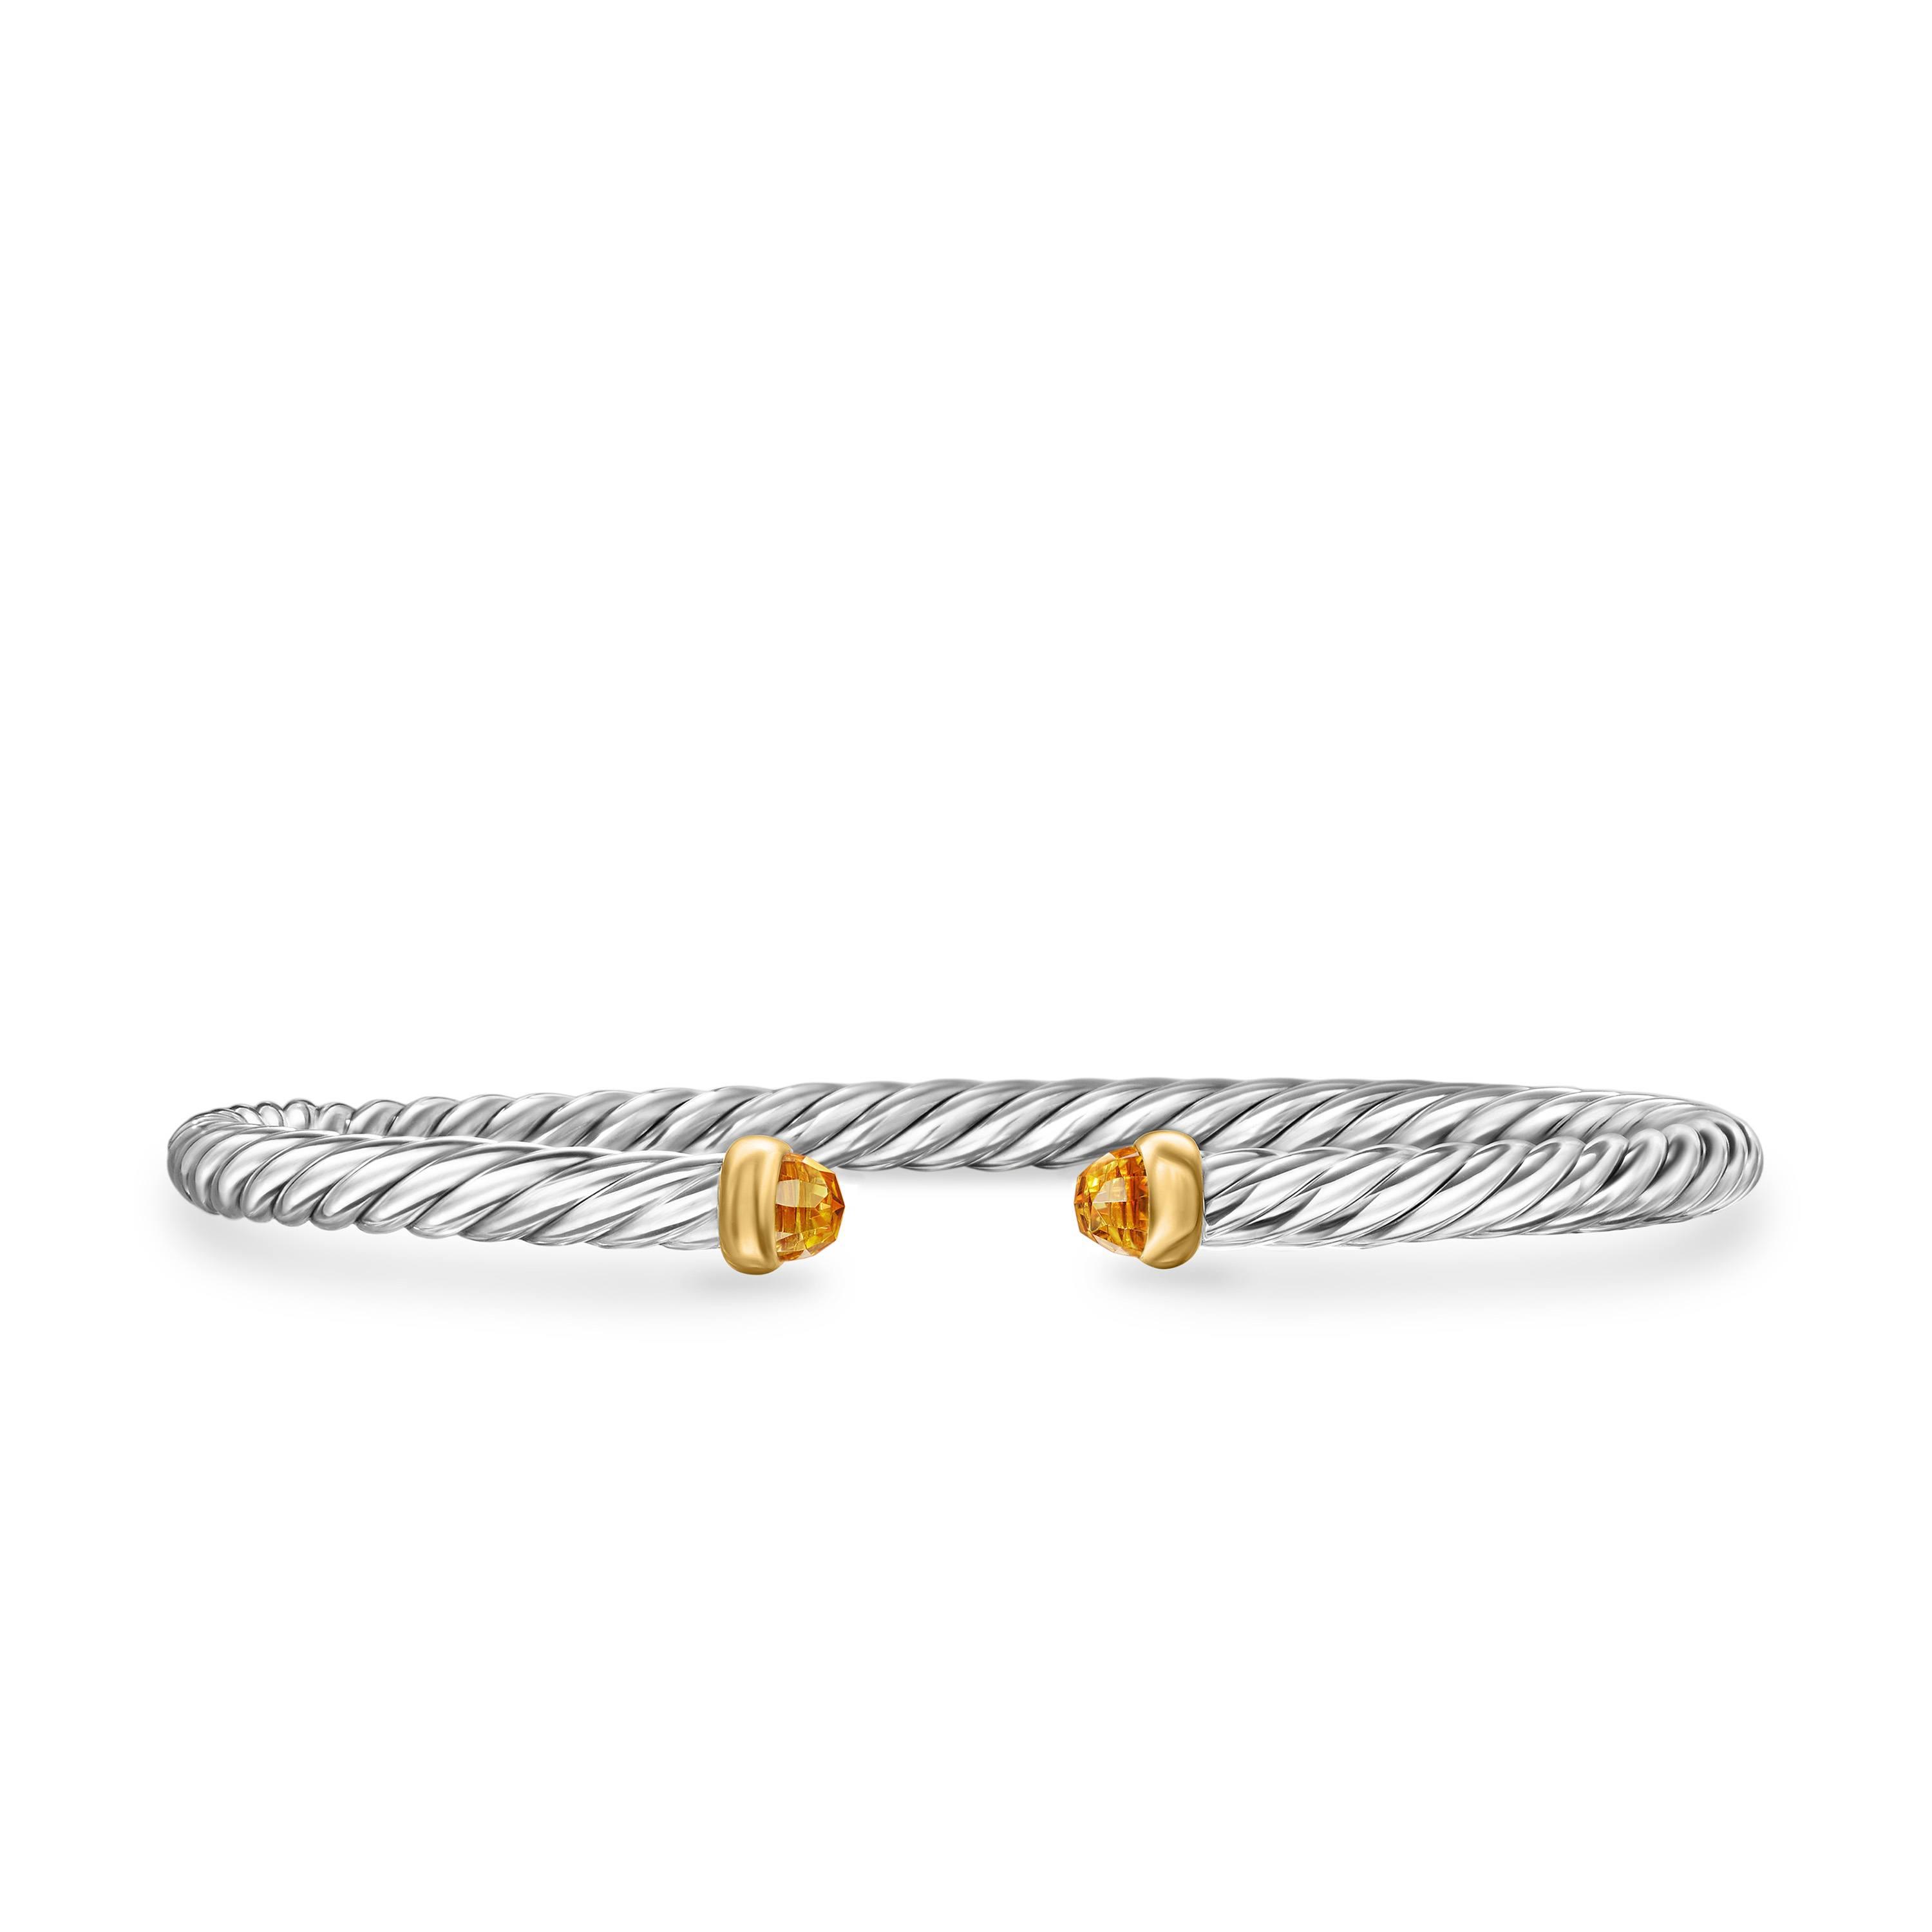 David Yurman Cable Flex Sterling Silver Bracelet with Citrine, Size Small